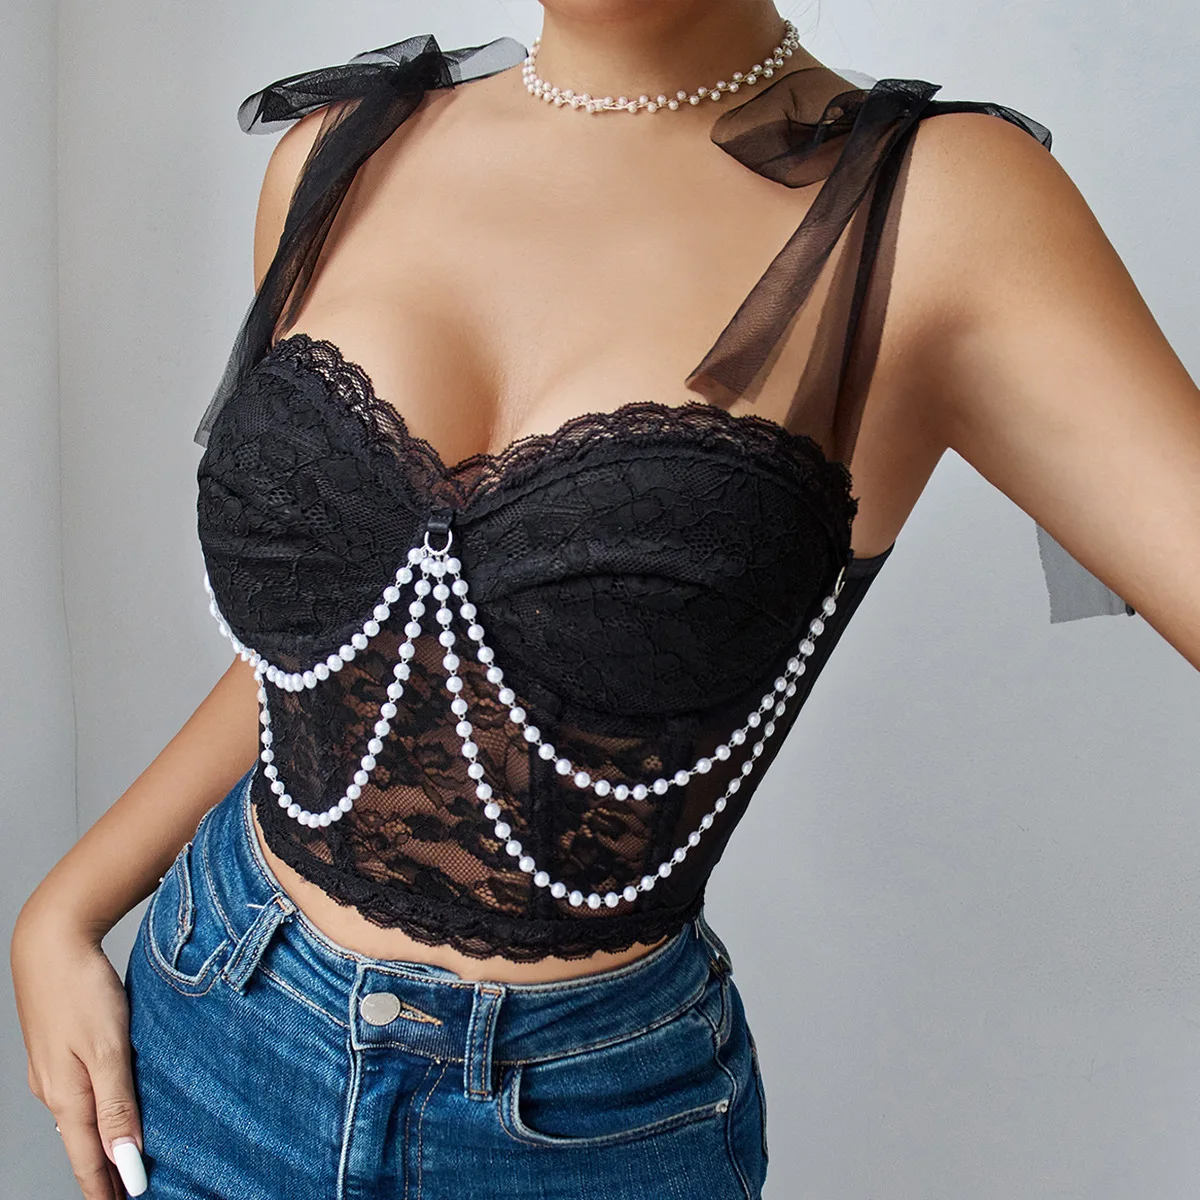 

Pearl Chain Crop Tops for Women Summer Sexy Slim Lace Hollow Halter Tank Top Sheer Vest Boned Corset Fashion Sleeveless Camisole